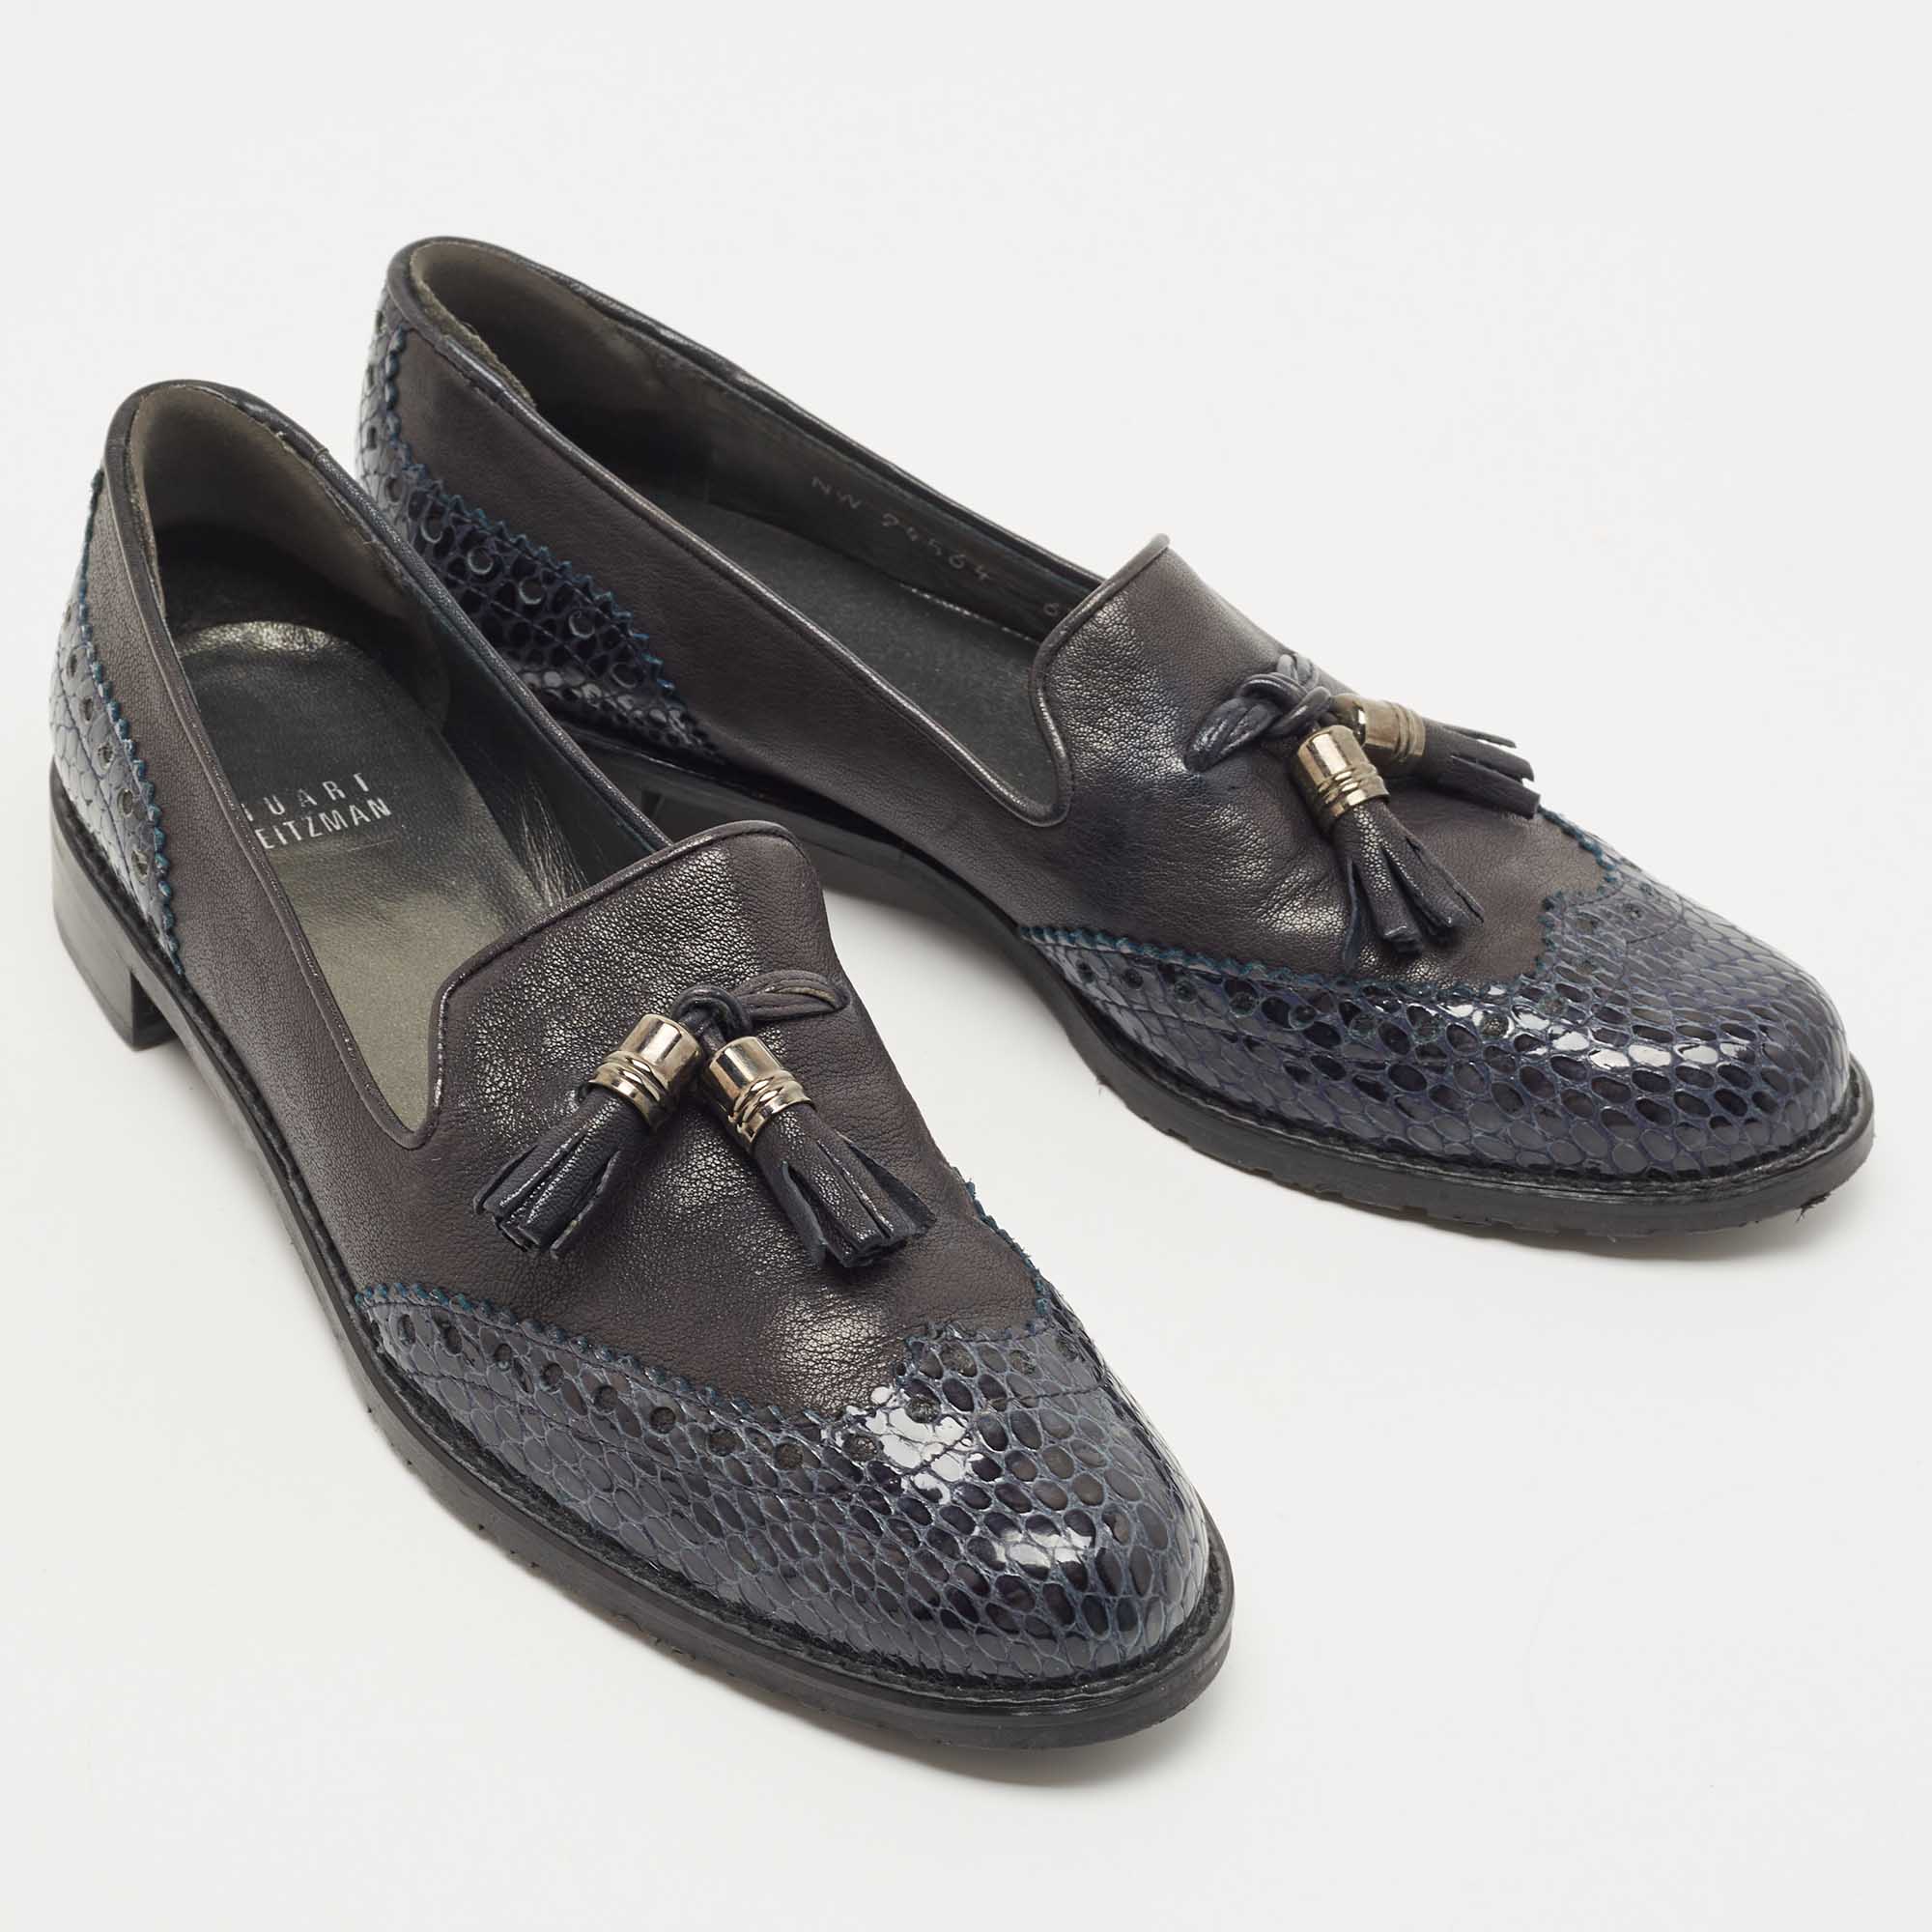 Stuart Weitzman Grey/Black Python Embossed And Leather Tassel Loafers  Size 37